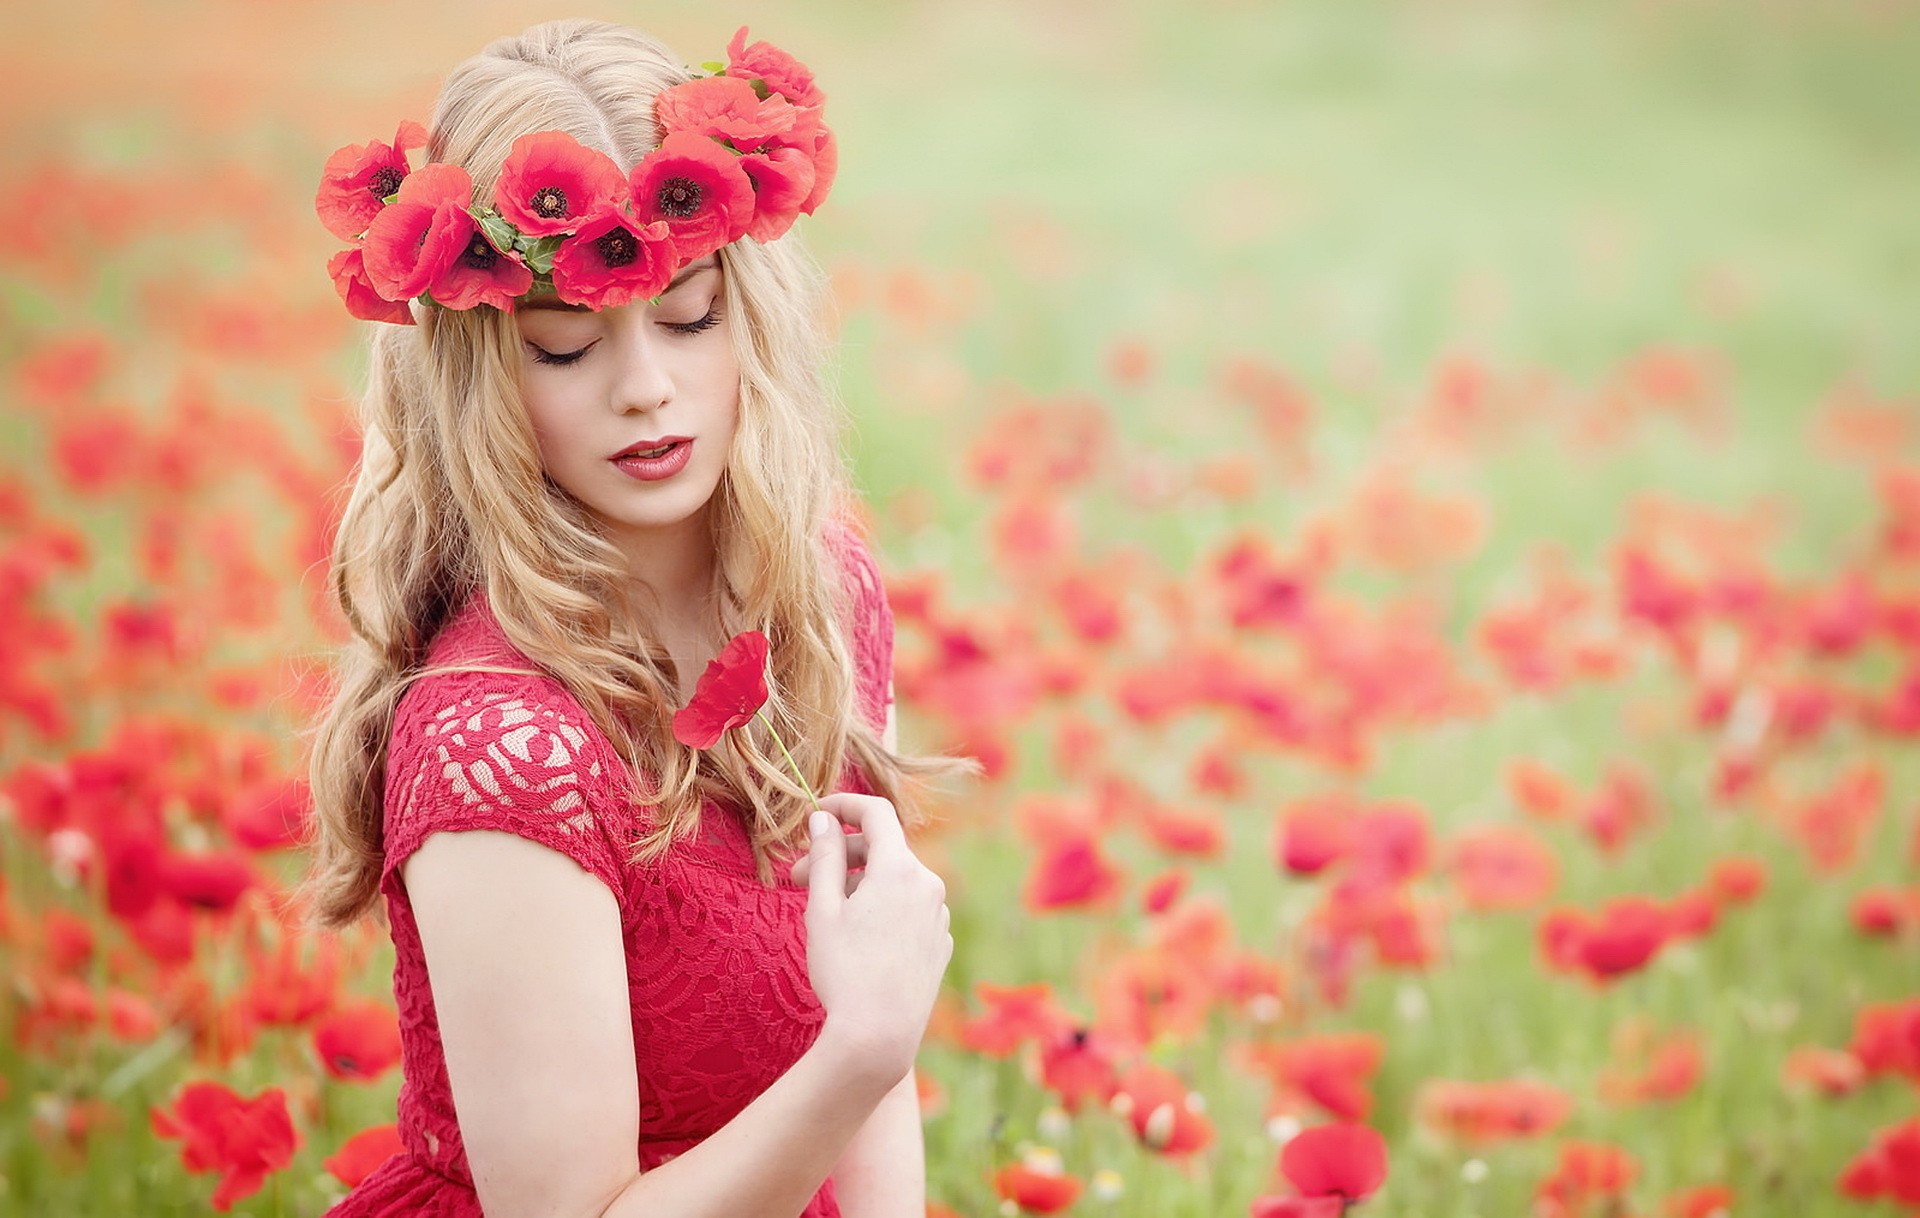 Flowers Field Nature Women Closed Eyes Poppies 1920x1218